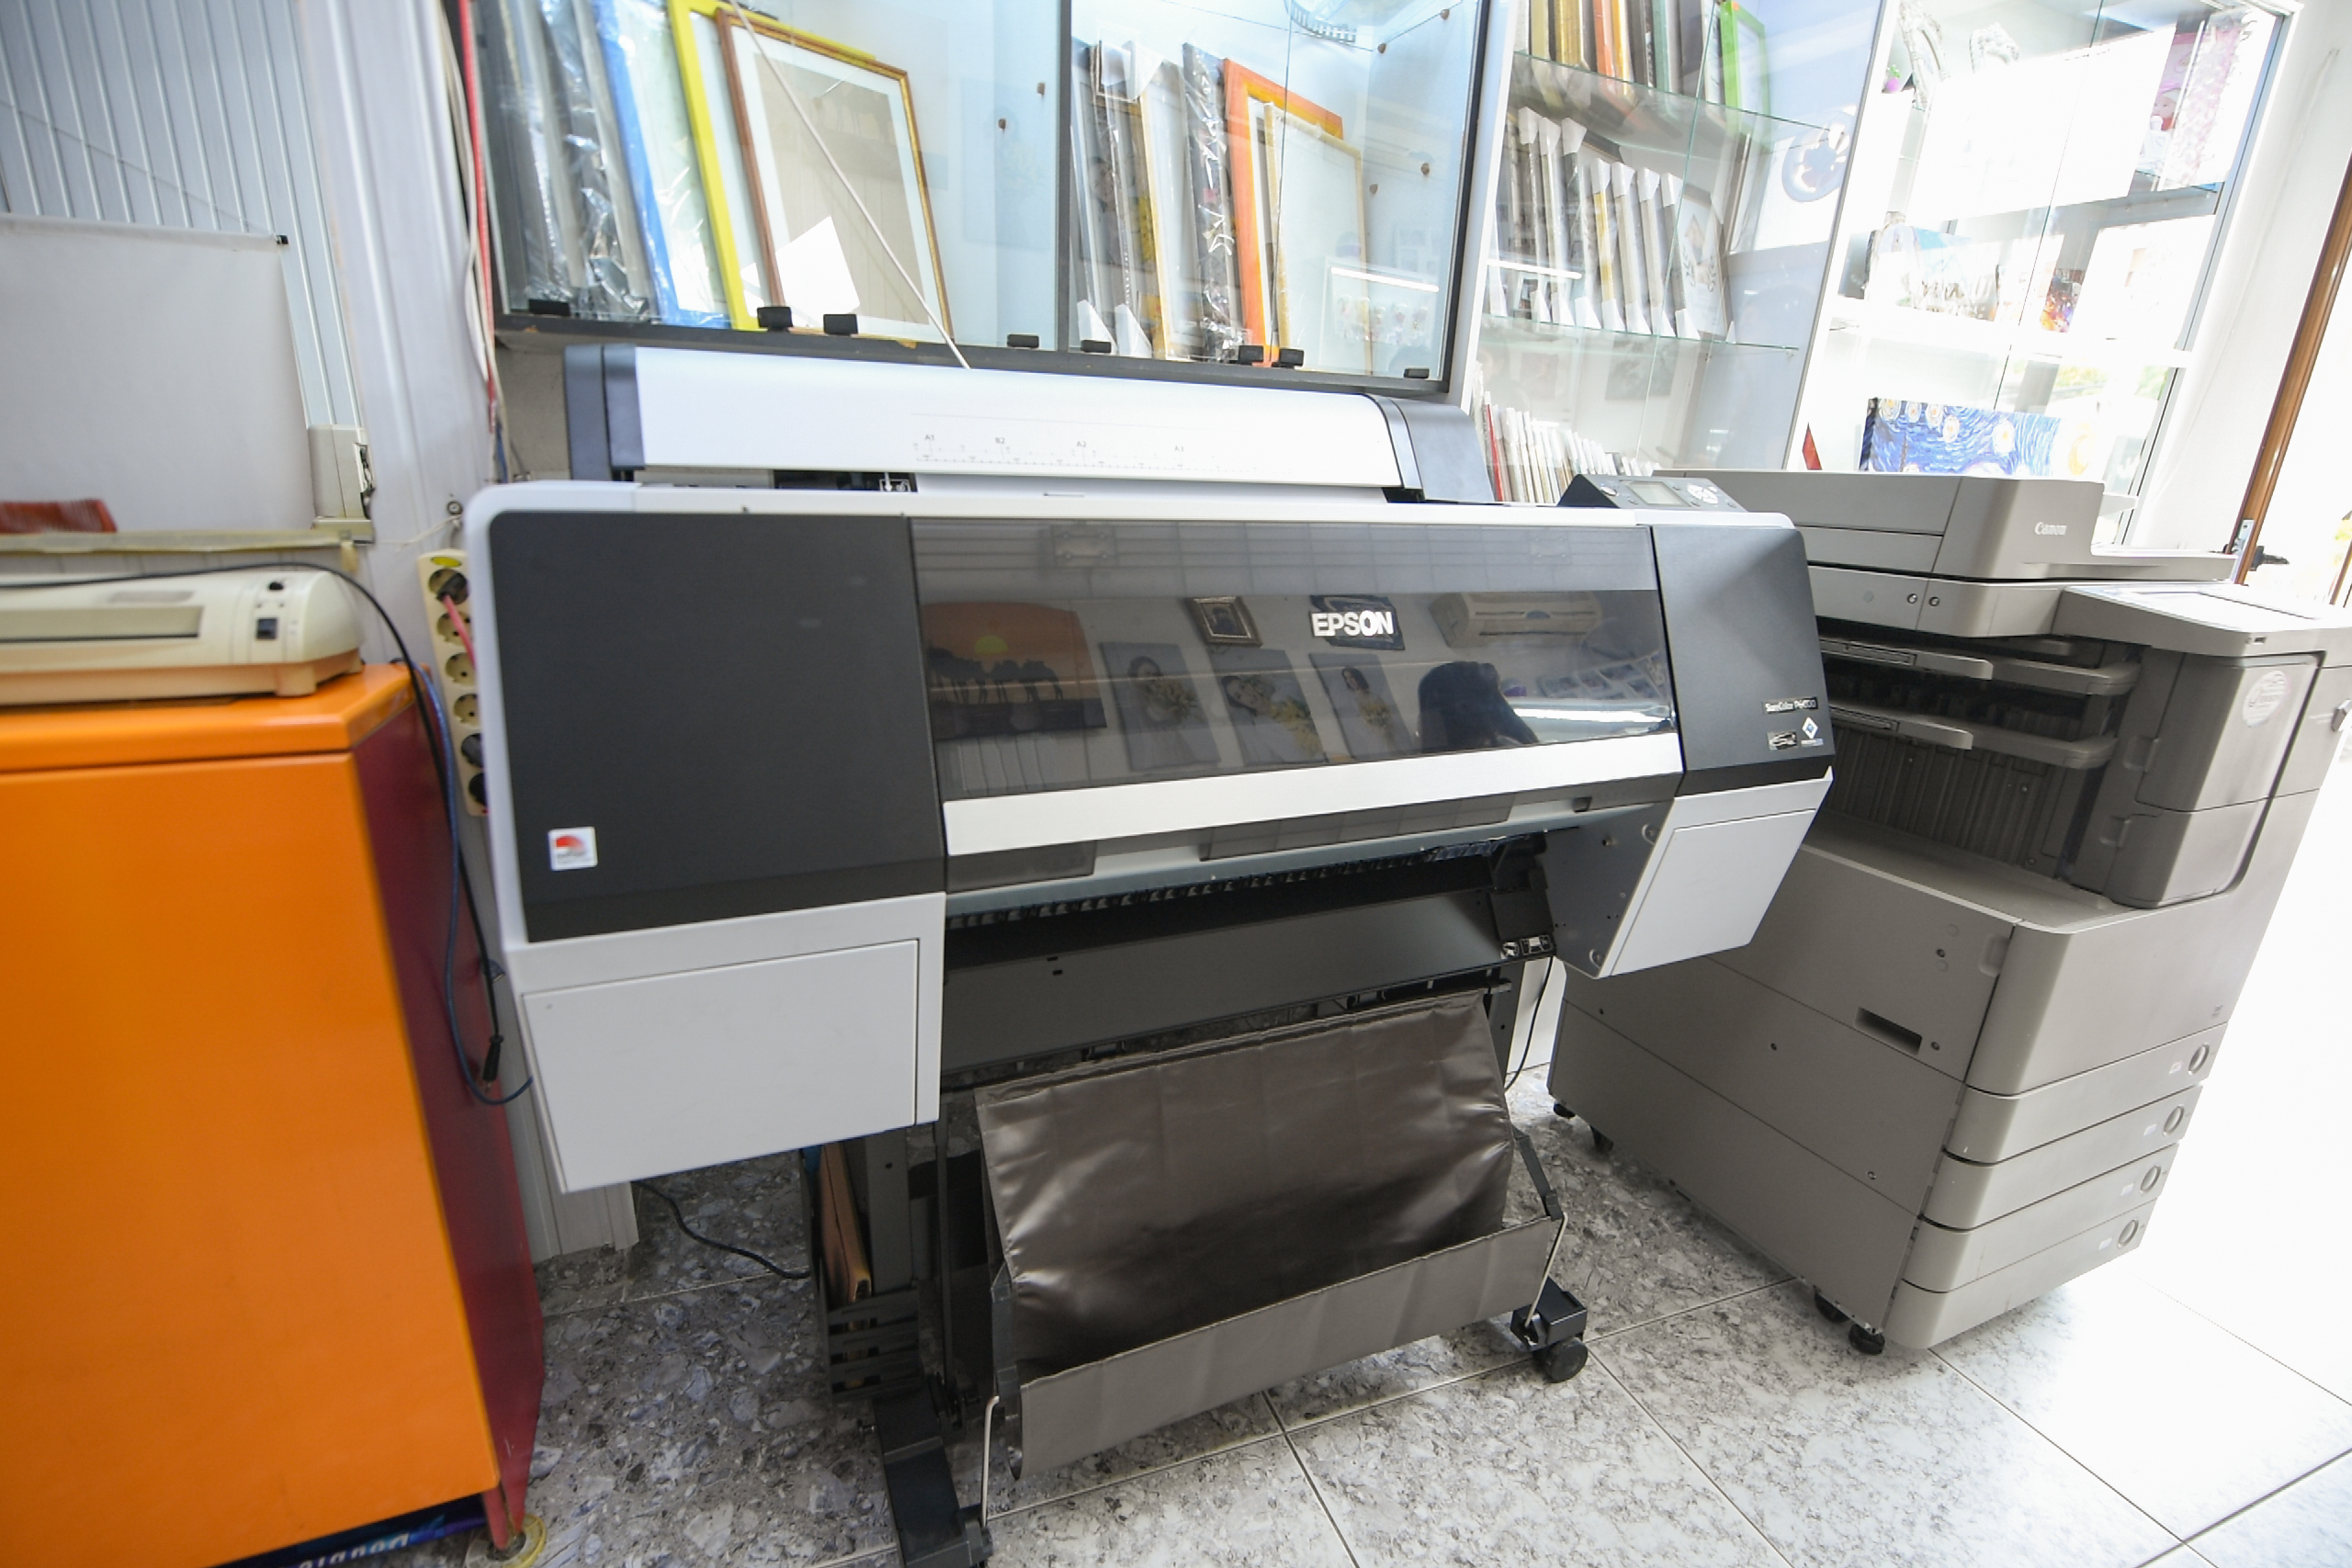 The new printer Suada and Erisa received through UNDP support.